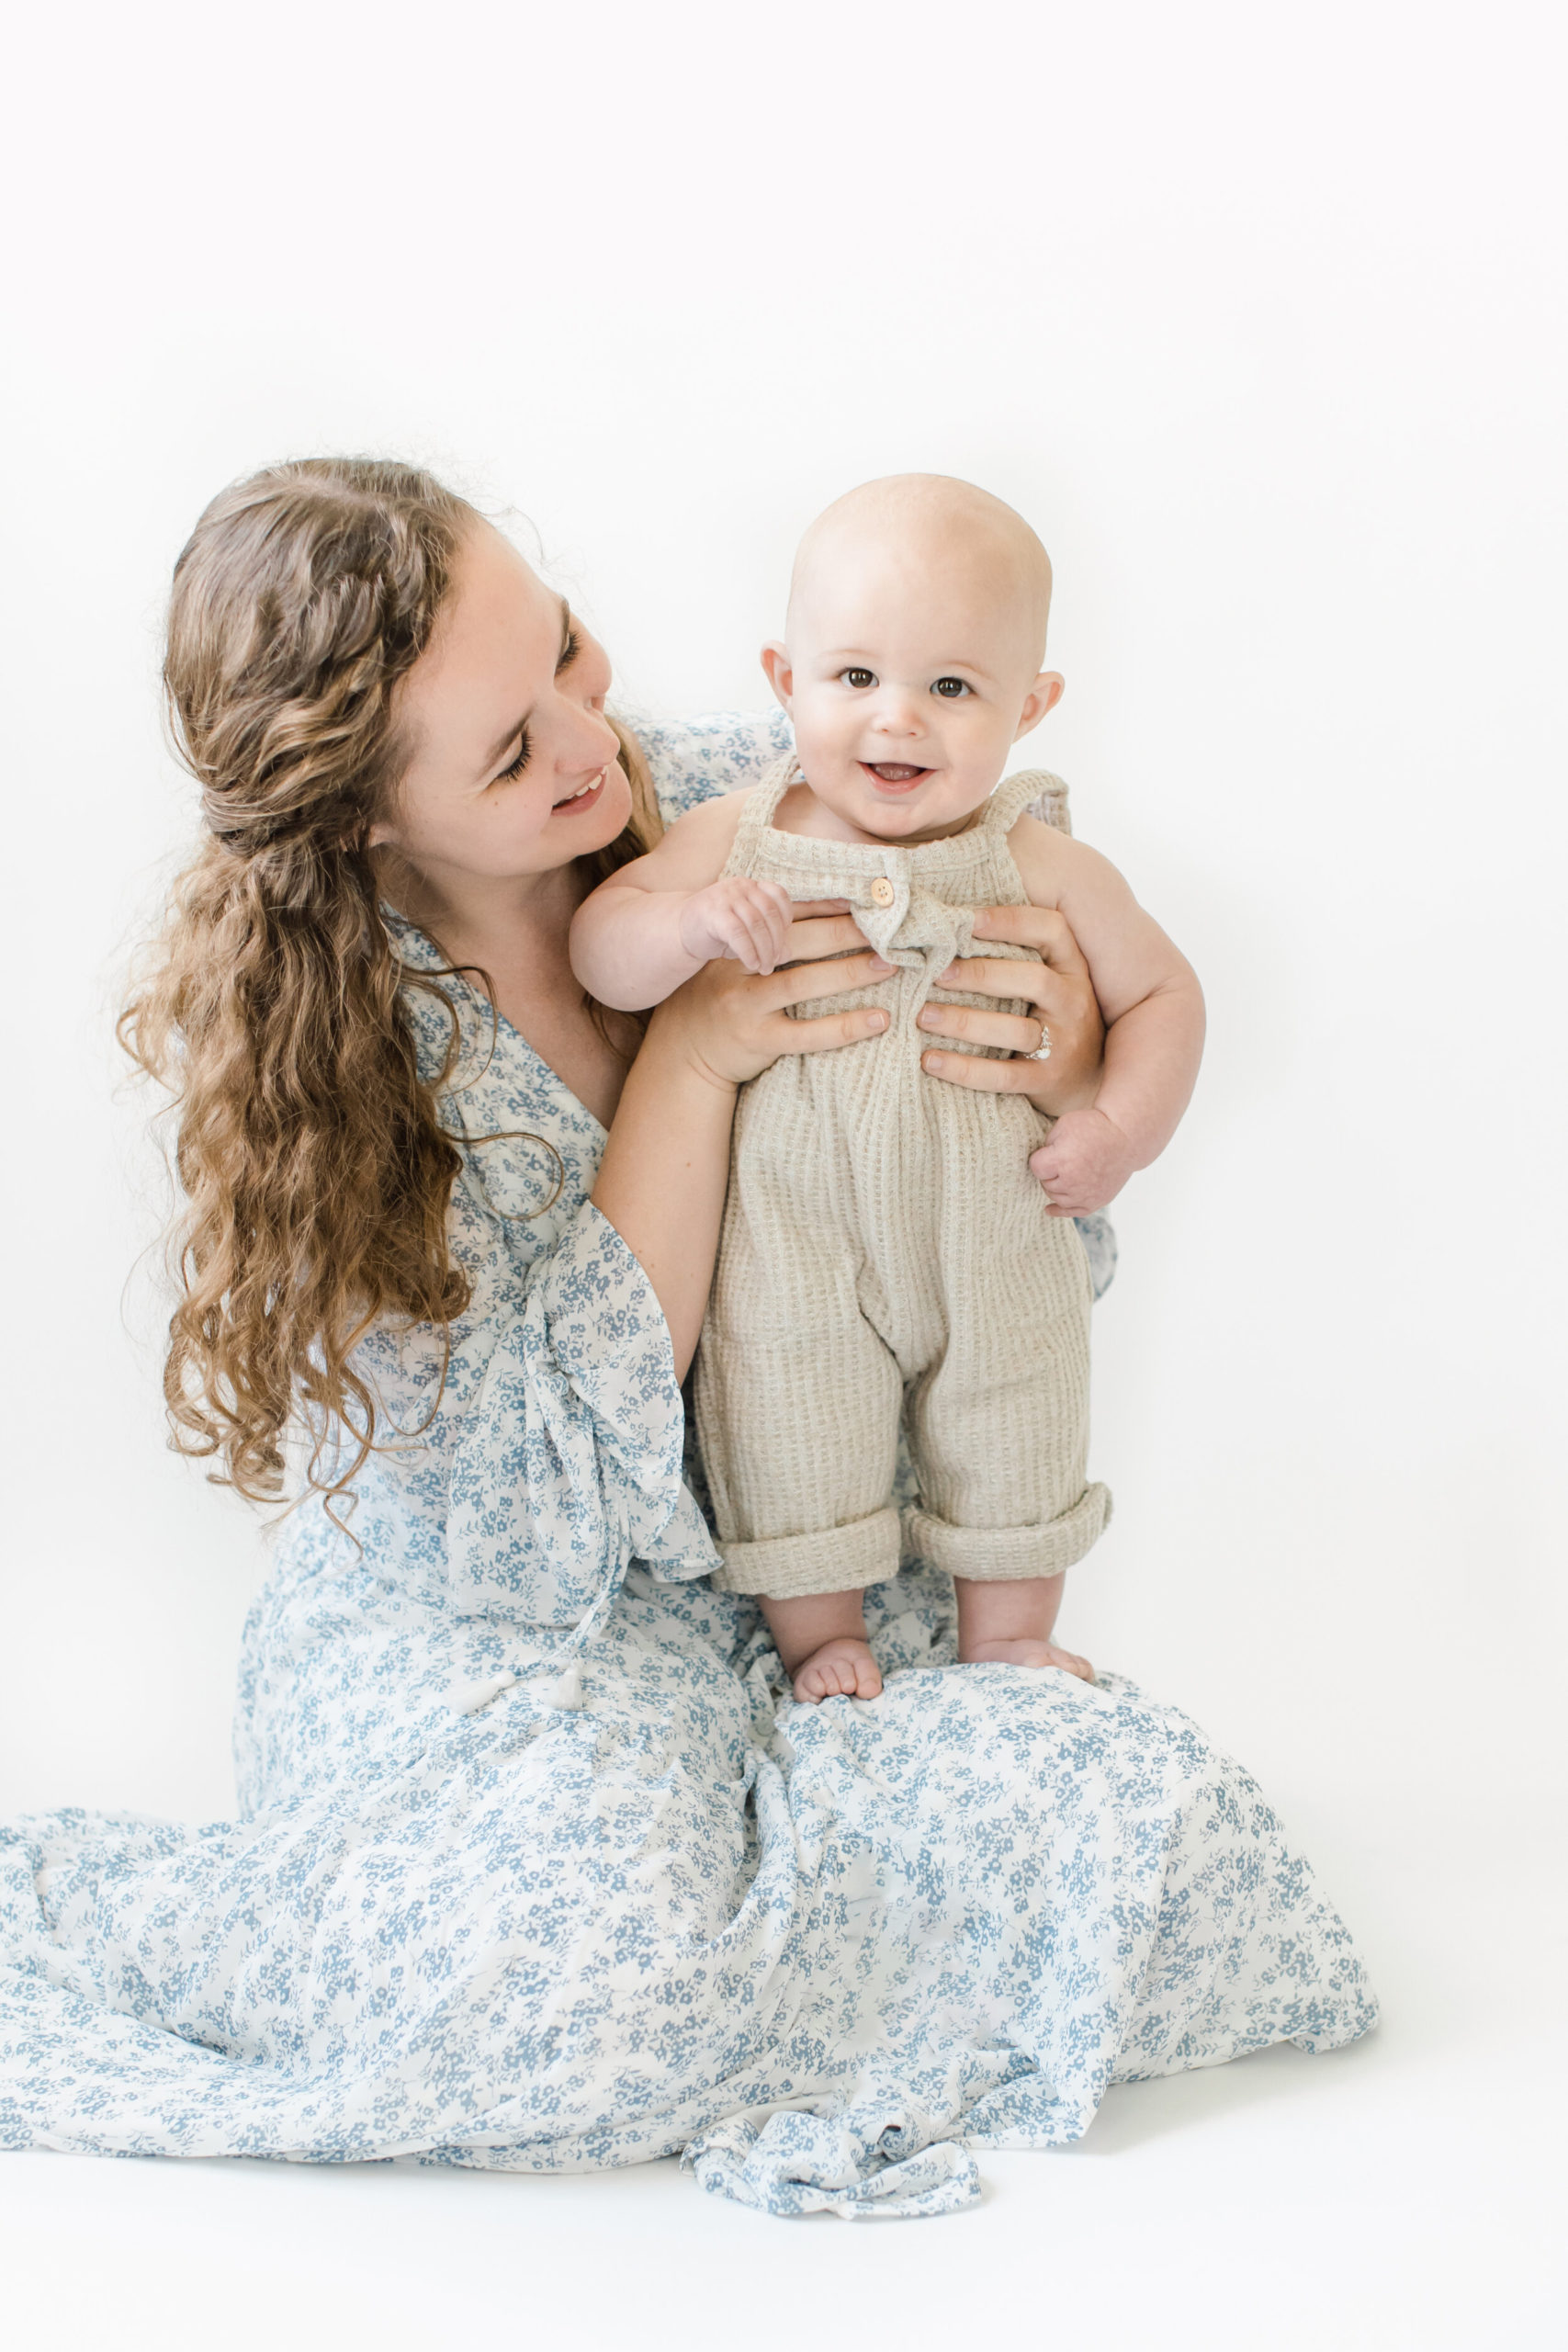 Mom with 6 Month Old Baby Photo Shoot